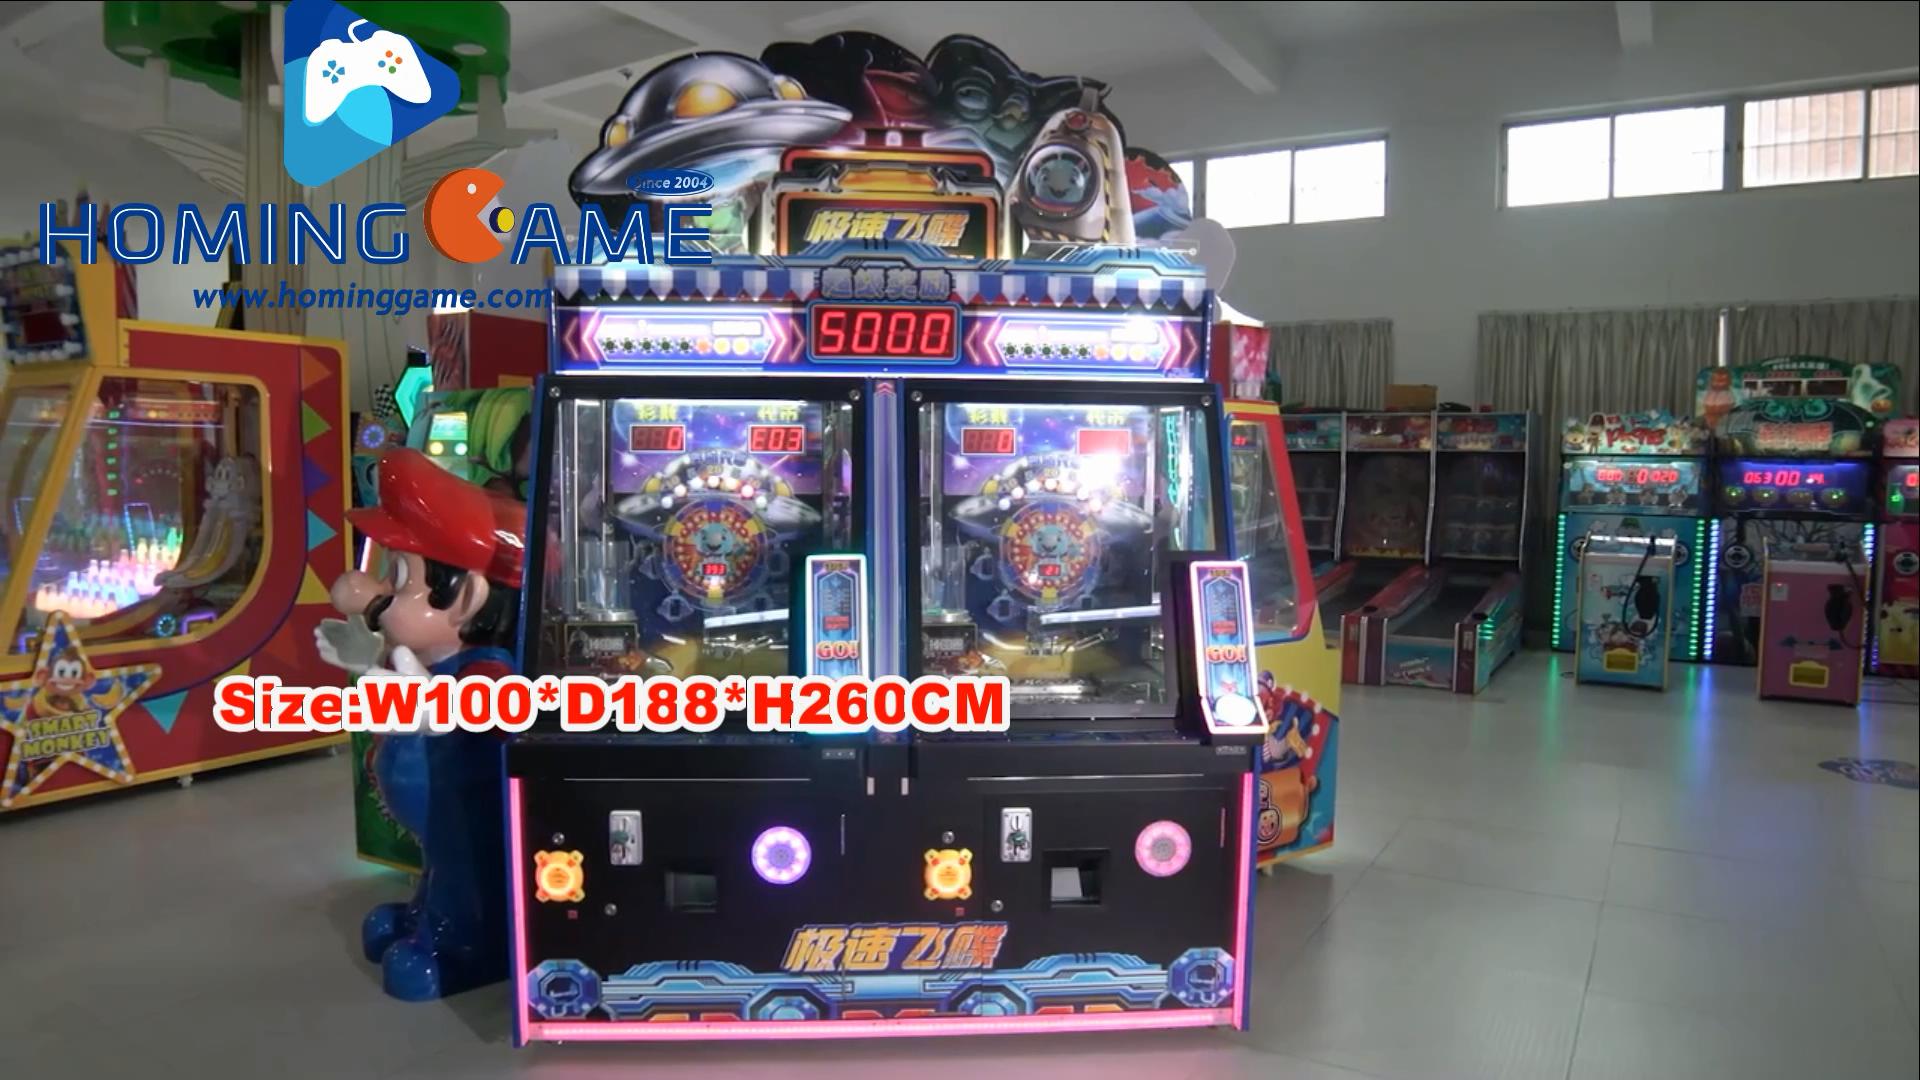 Hover race,hover race coin pusher game machine,hover race UFO coin pusher game machine,UFO coin pusher game machine,UFO token pusher game machine,happy crazy circus coin pusher game machine,happy crazy circus,happy crazy circus coin pusher arcade game machine,crazy circus,crazy circus coin pusher game machine,super crazy circus coin pusher game machine,penny pusher arcade game machine,penny pusher game machine,coin pusher game,token pusher game machine,crazy circus coin pusher arcade game machine,game machine,arcade game machine,coin operated game machine,indoor game machine,electrical game machine,amusement park game equipment,game equipment,coin pusher redemption game machine,hominggame,hominggame coin pusher game machine,gametube.hk,www.gametube.hk,coin pusher arcade games,3 player coin pusher game machine,2 player coin pusher game machine,flip 2 win coin pusher game machine,gold fort coin pusher game machine,las vegas coin pusher game machine,Pharaoh